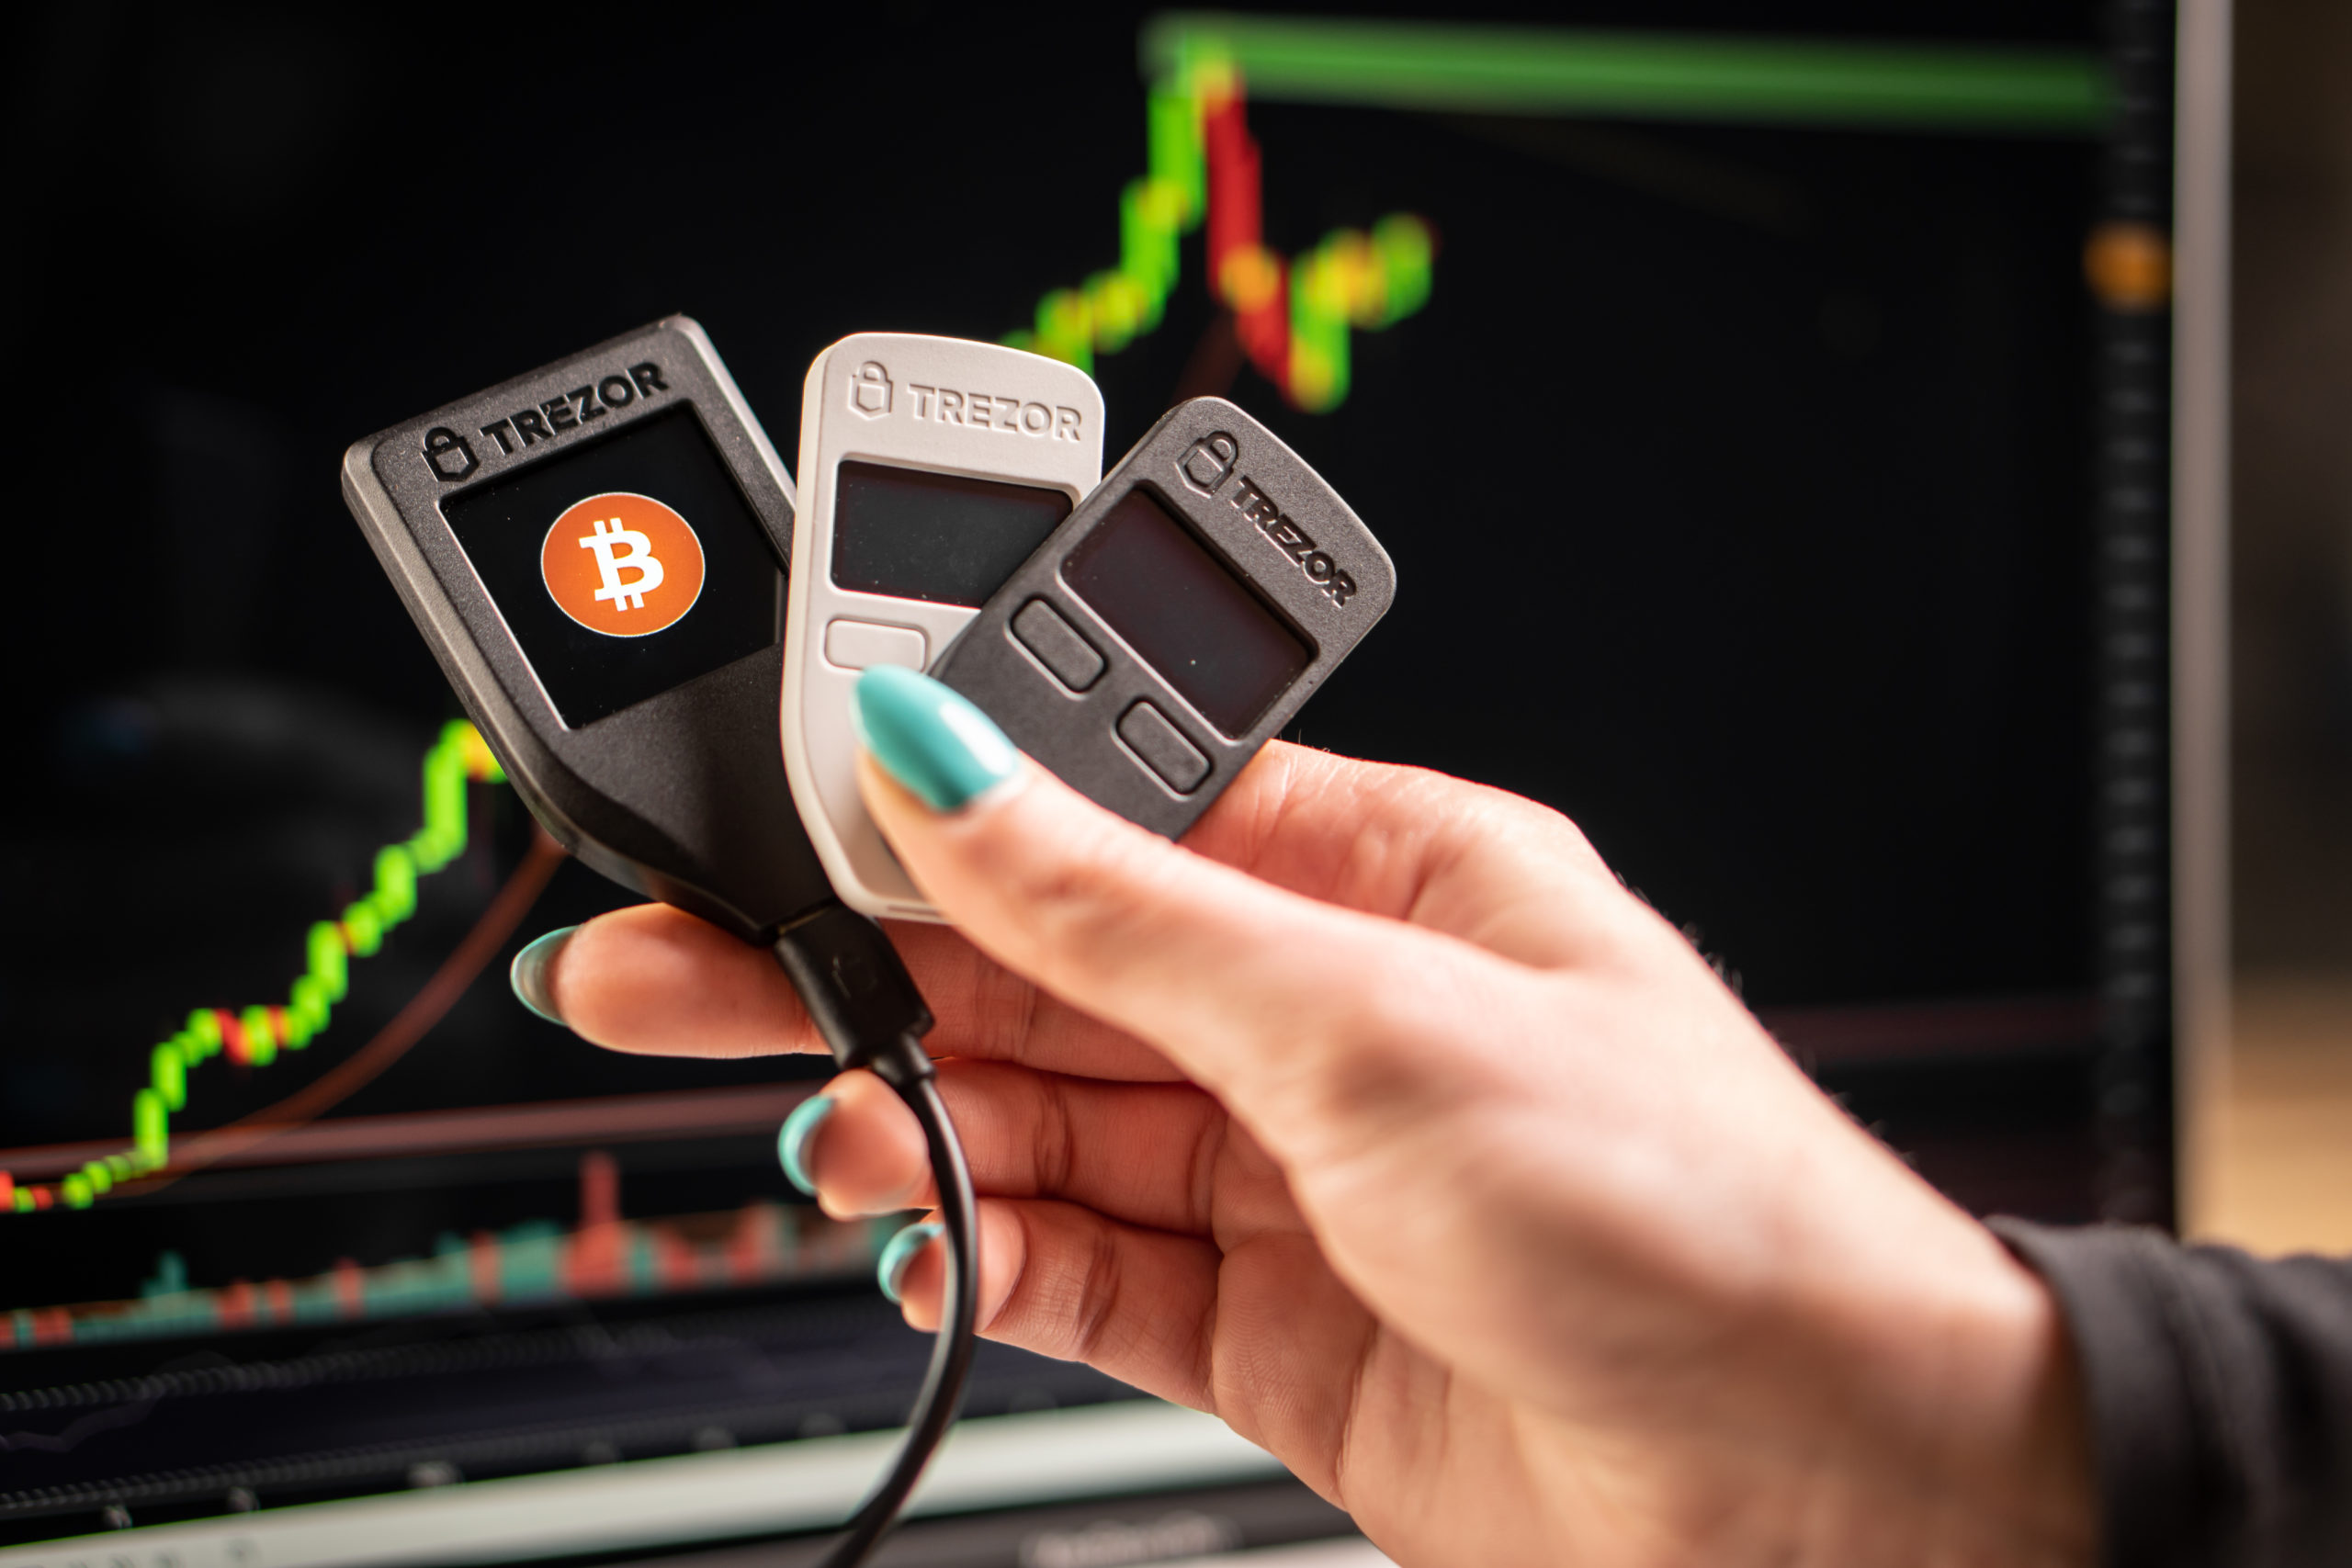 Trezor hardware wallets held in hand in front of graph